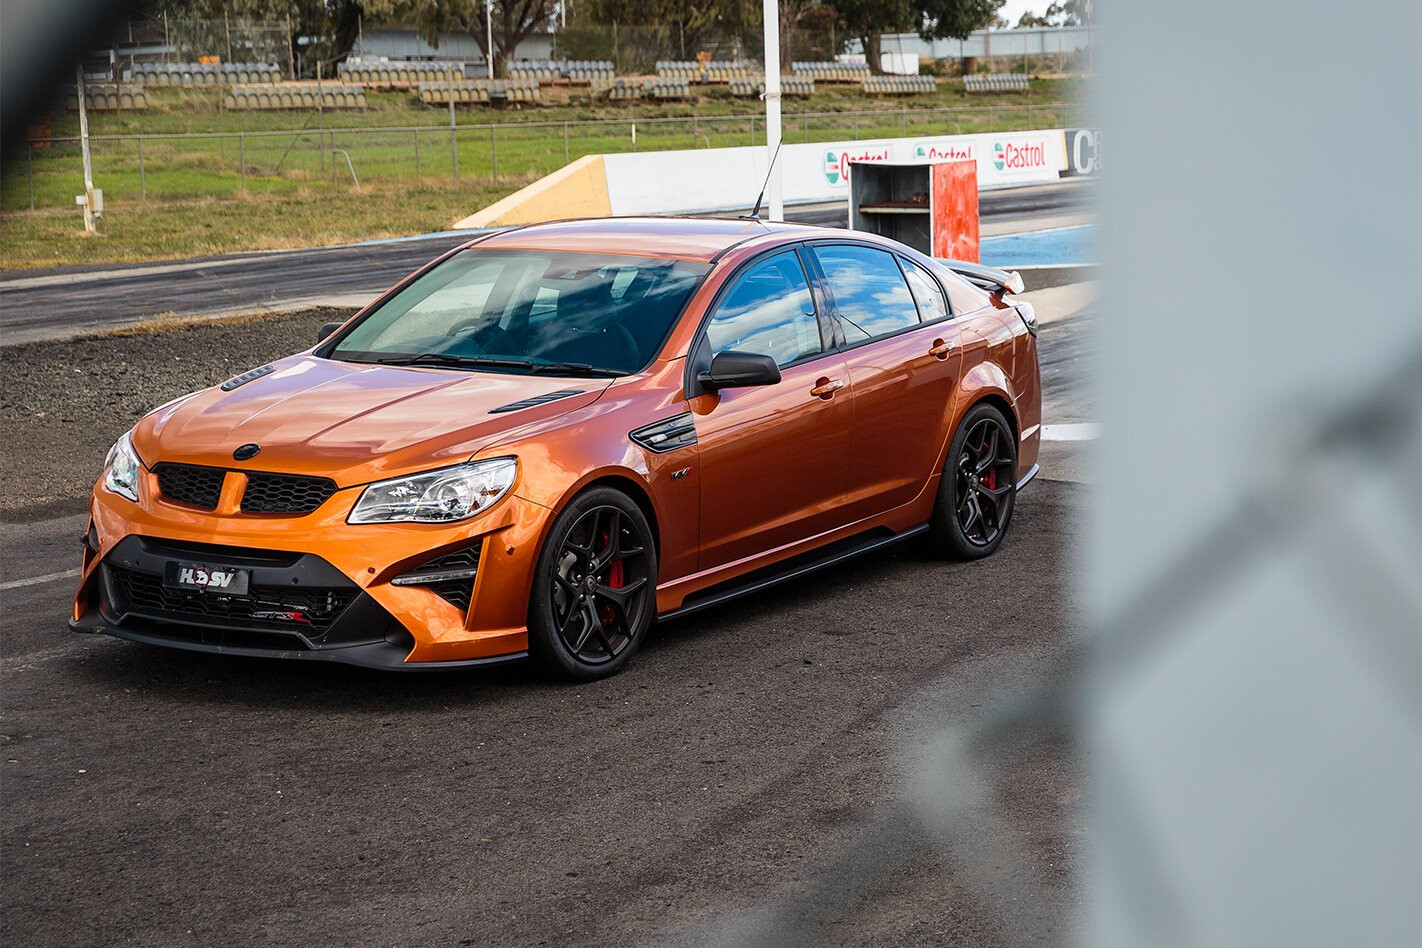 Hsv Gts R W1 Misses Performance Claims